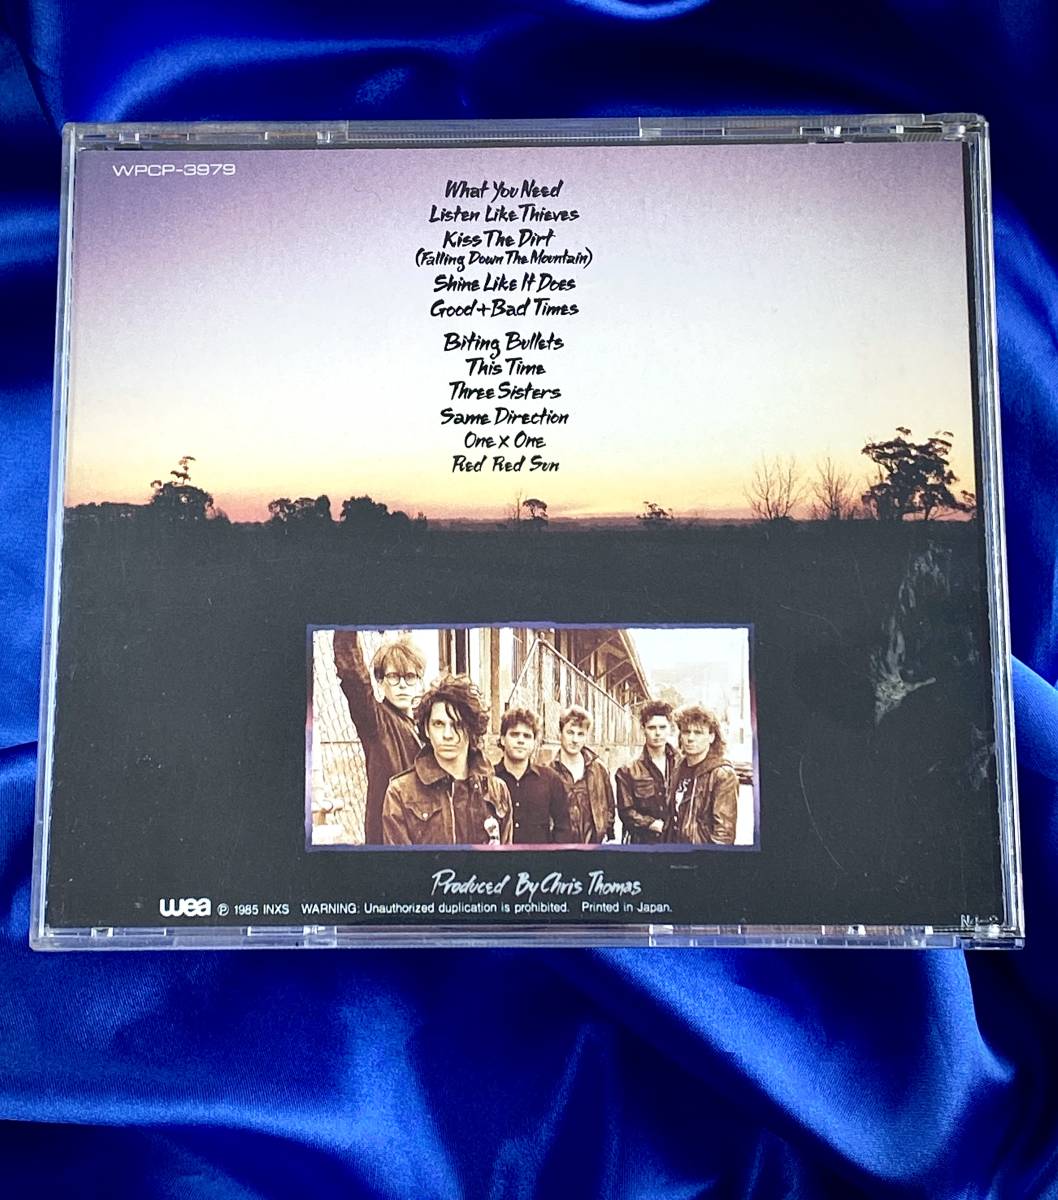 ★INXS / Listen Like Thieves_インエクセス/リッスンライクシーヴス●1990年国内盤CD_WPCP-3979_画像2